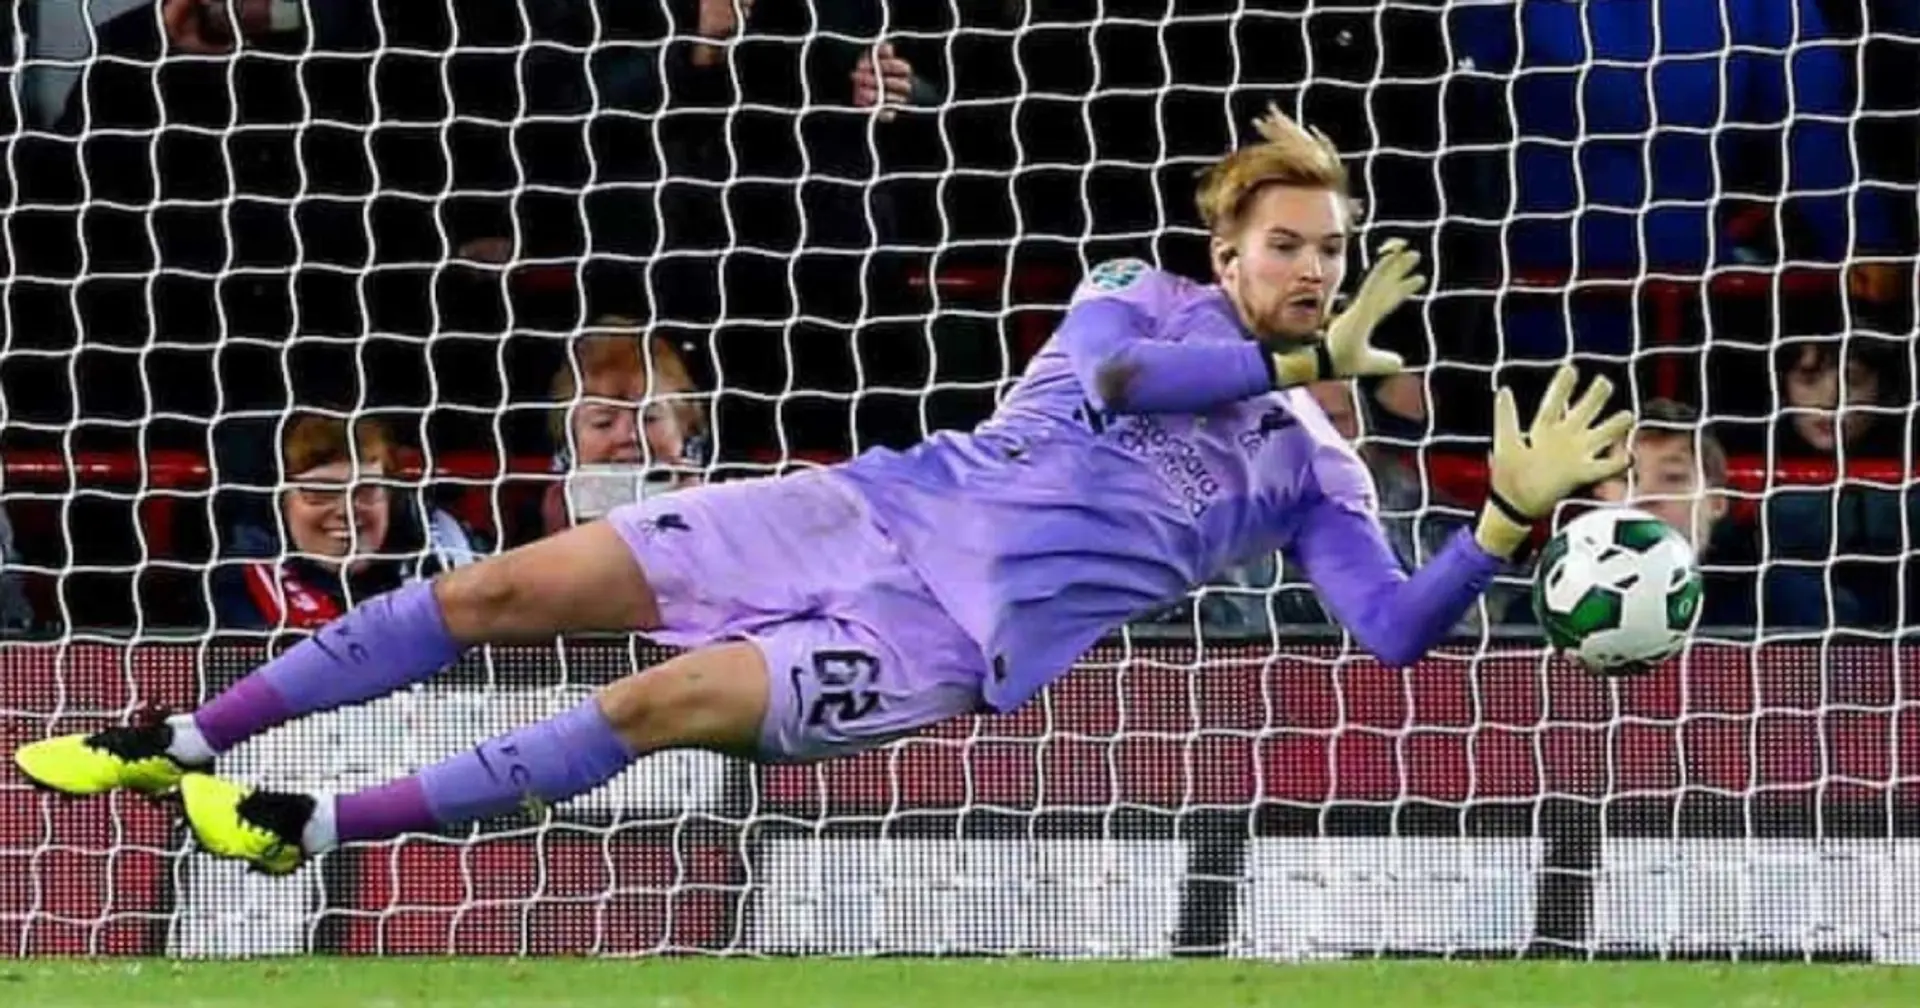 Kelleher becomes best keeper in Liverpool's history in shootouts won after just 18 games for club